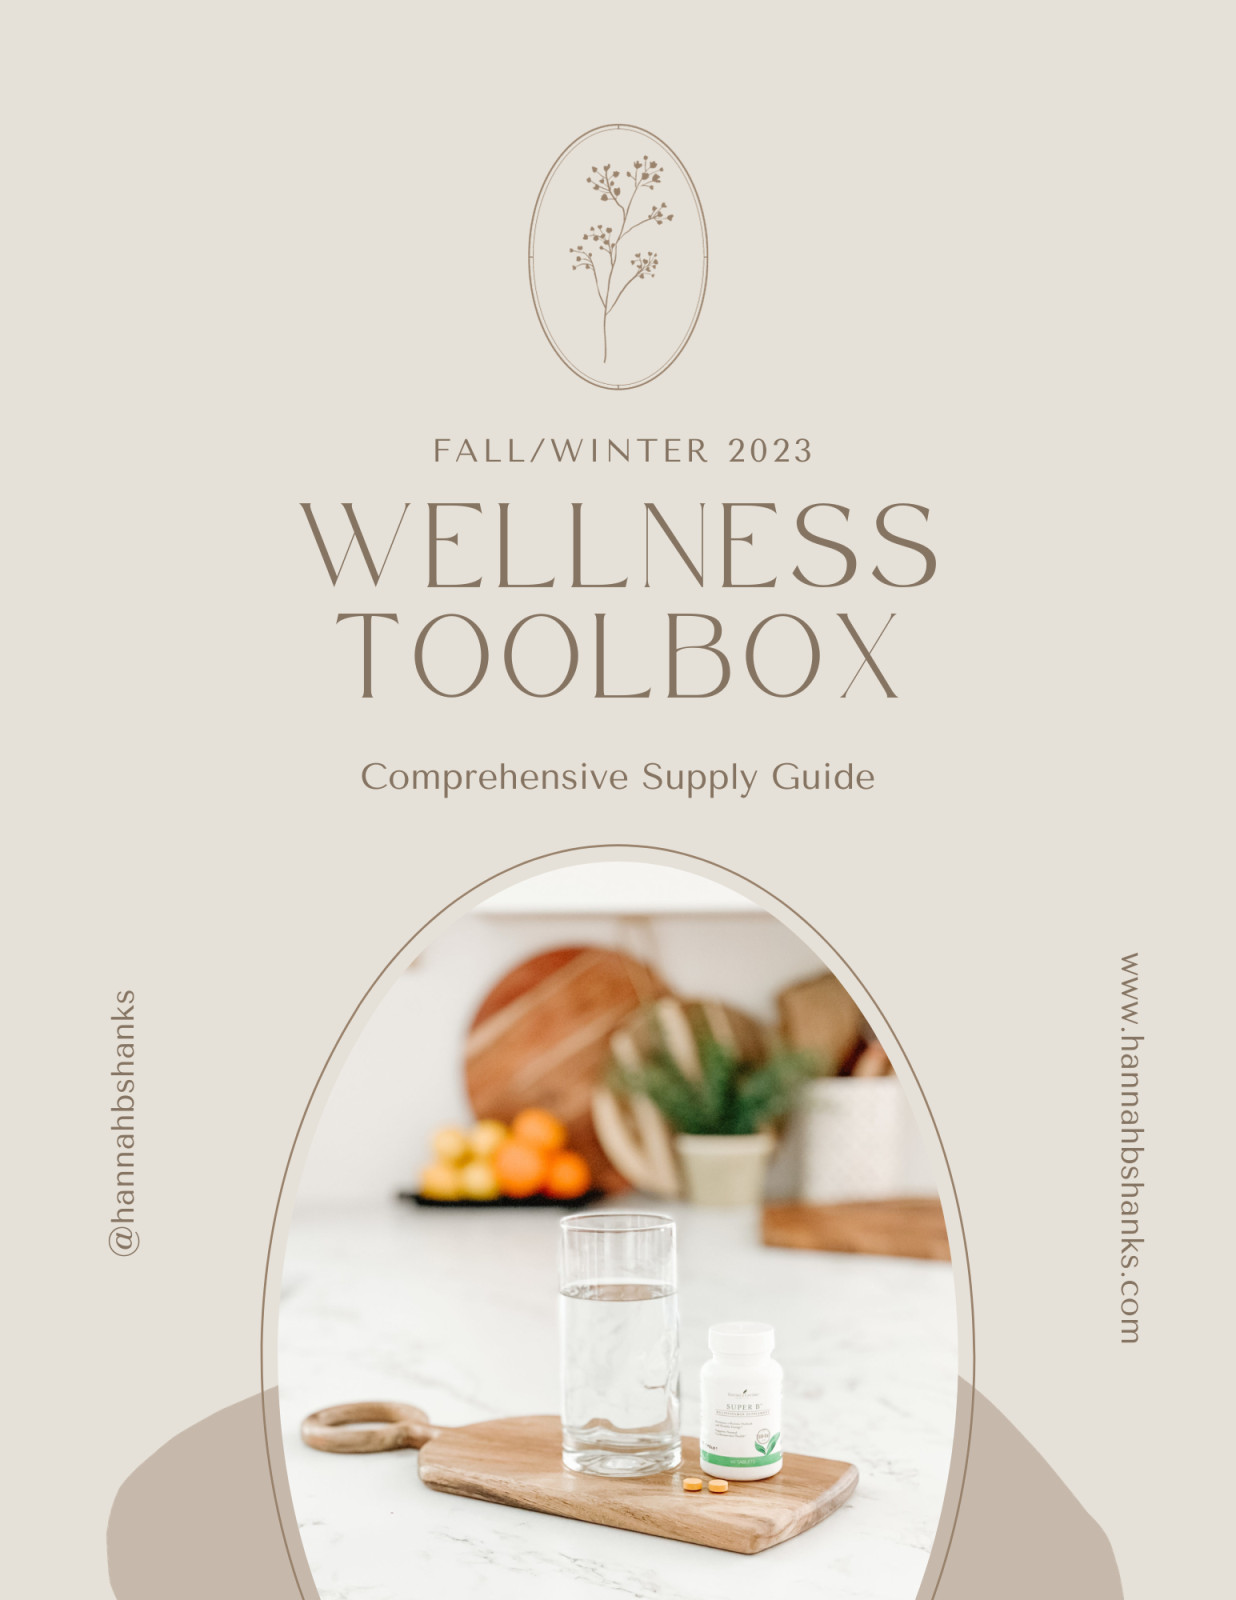 Must-Have Wellness Tools for Fall & Winter